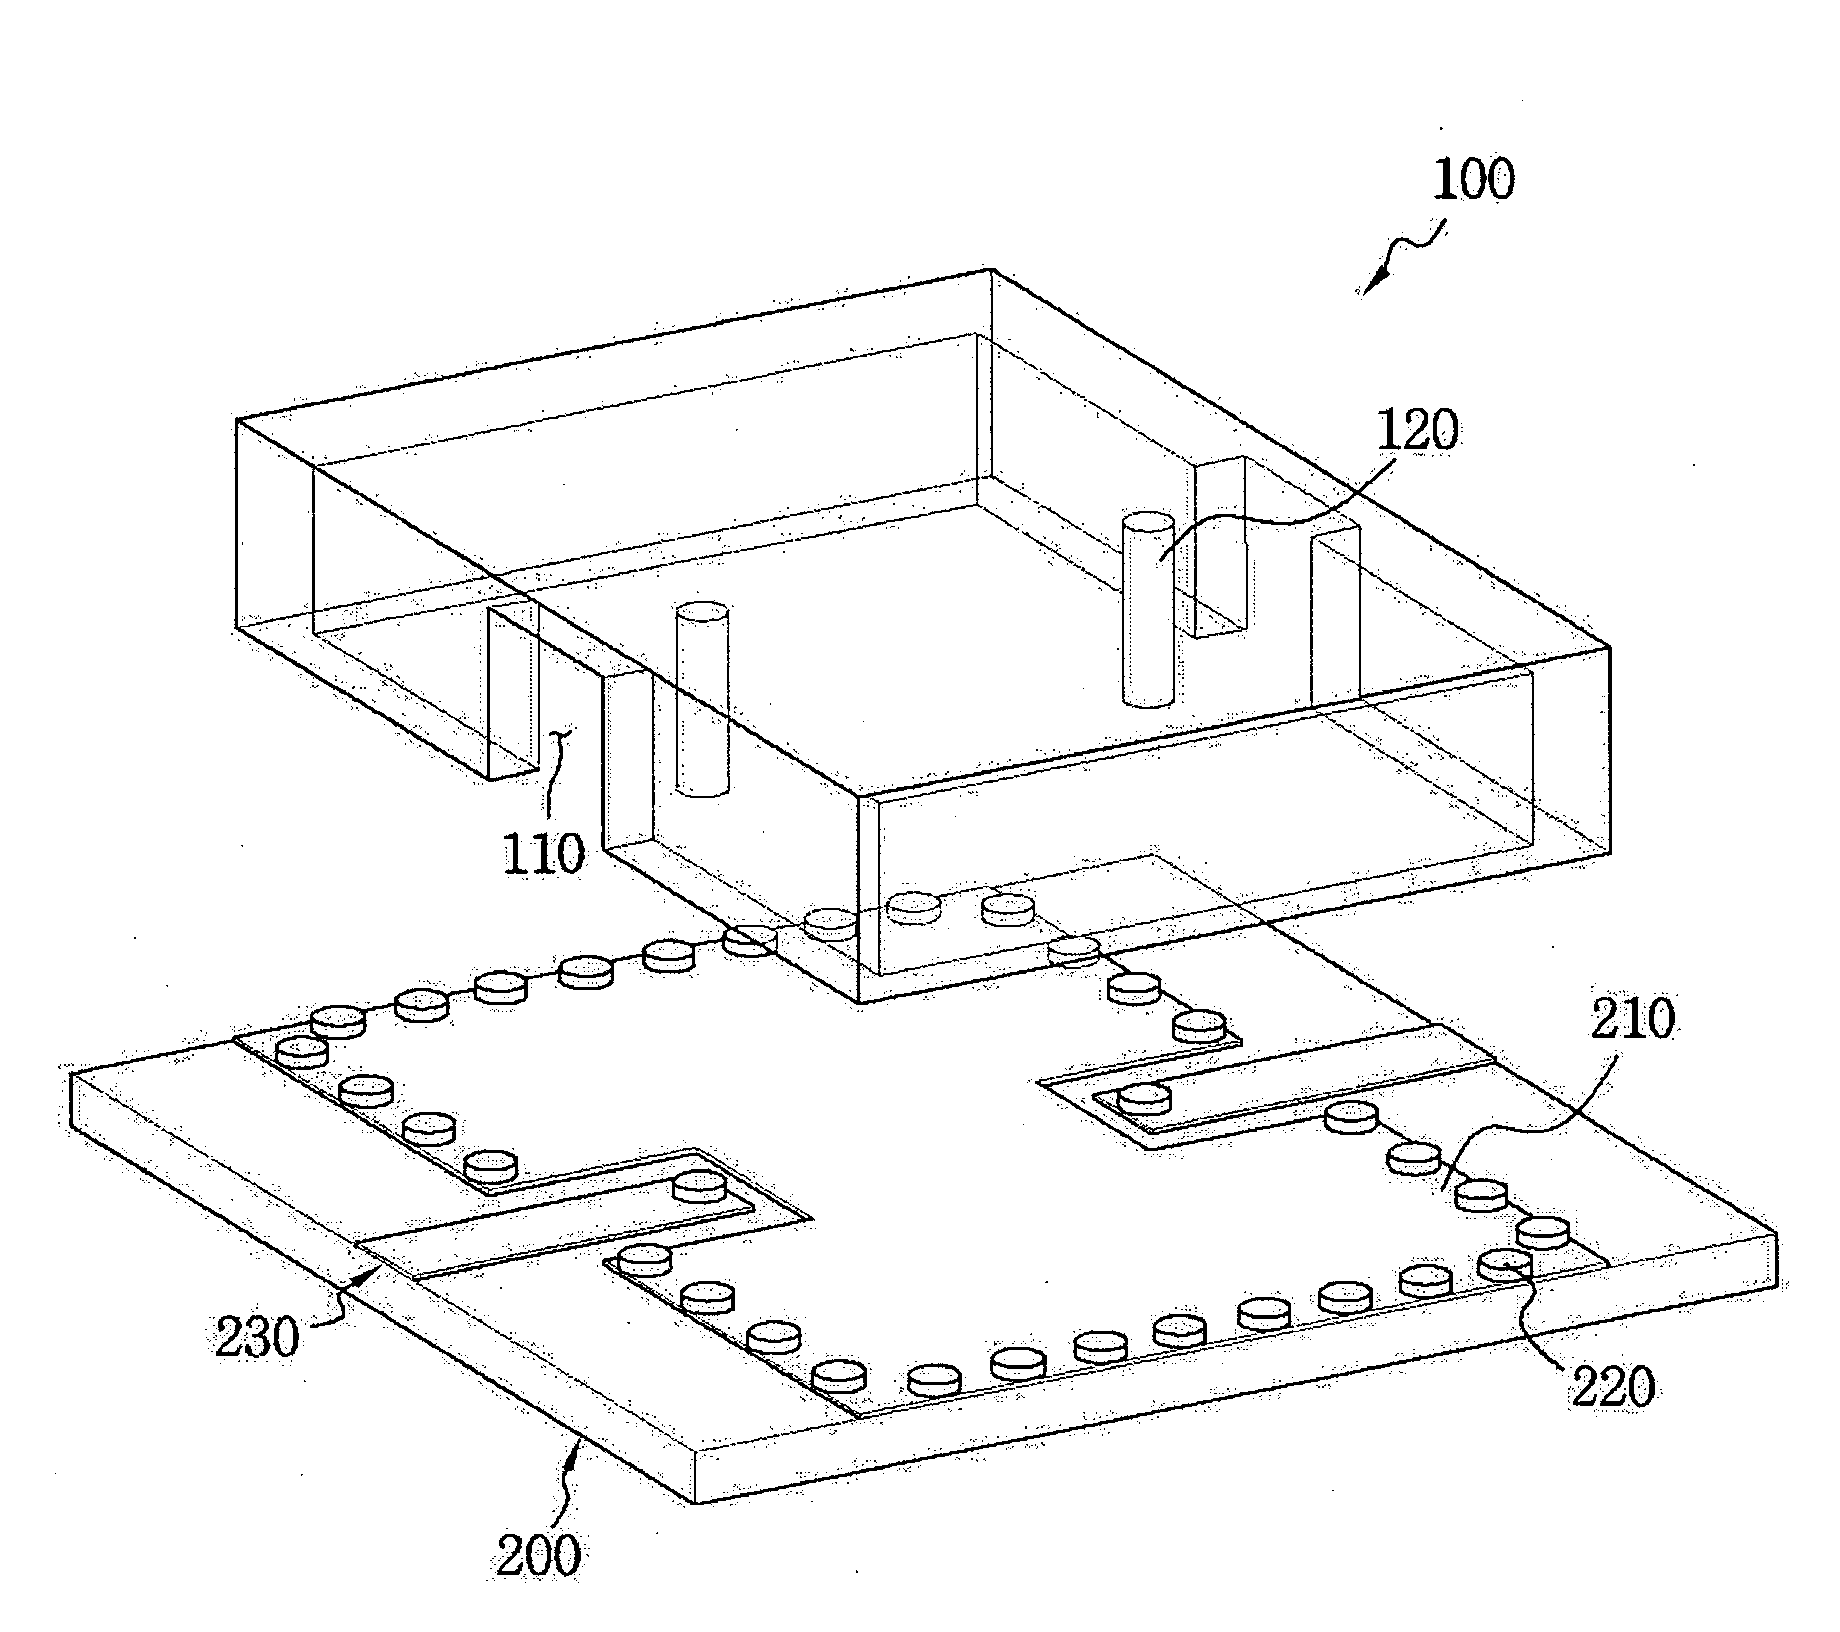 Method of producing micromachined air-cavity resonator, micromachined
air-cavity resonator, band-pass filter and oscillator using the method